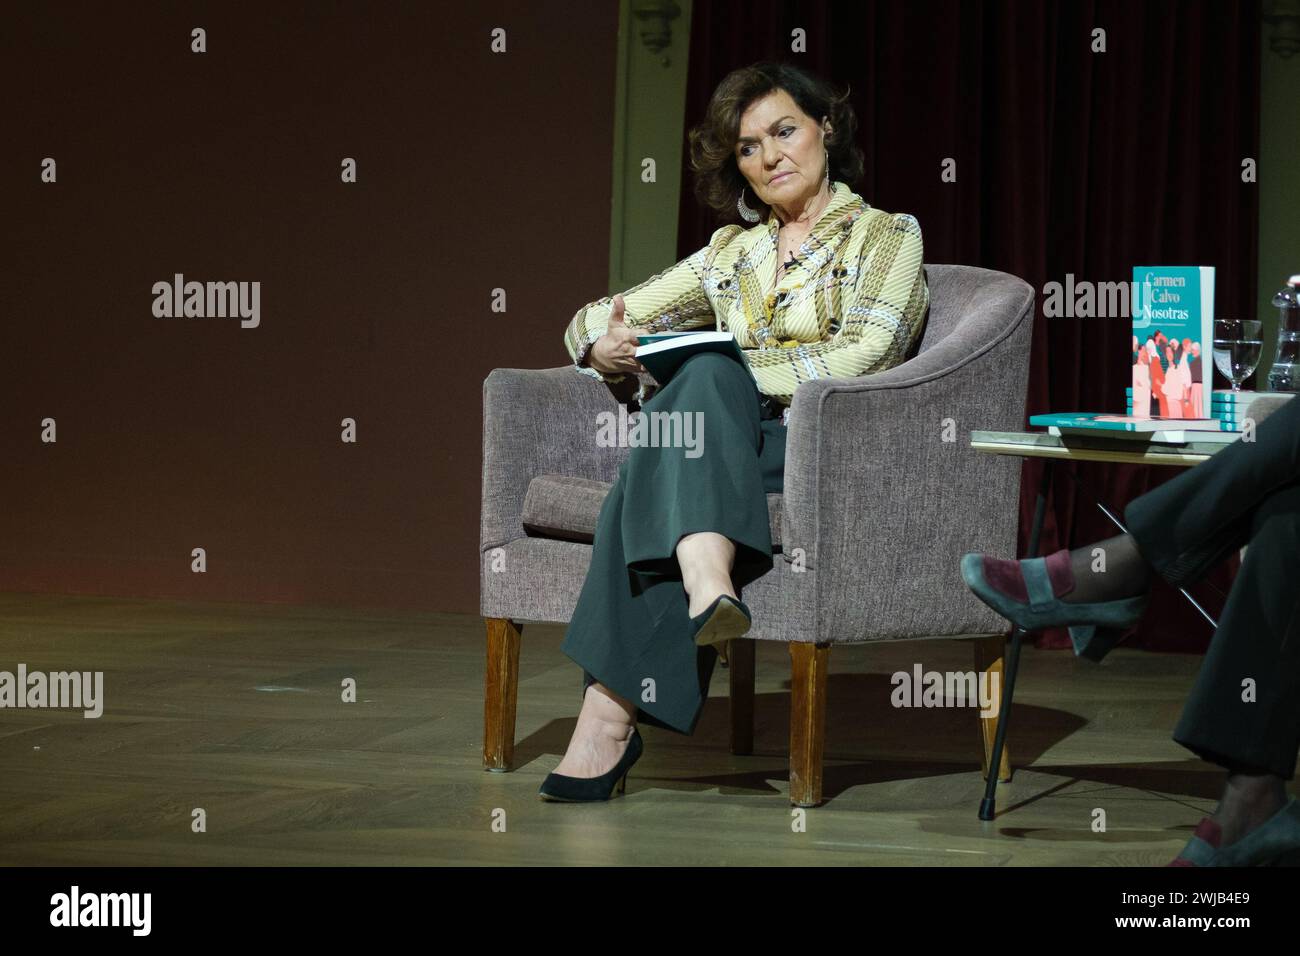 The president of the Council of State Carmen Calvo, during the presentation of her book 'Nosotras' at the Ateneo de Madrid, on 14 February, 2024 in Ma Stock Photo